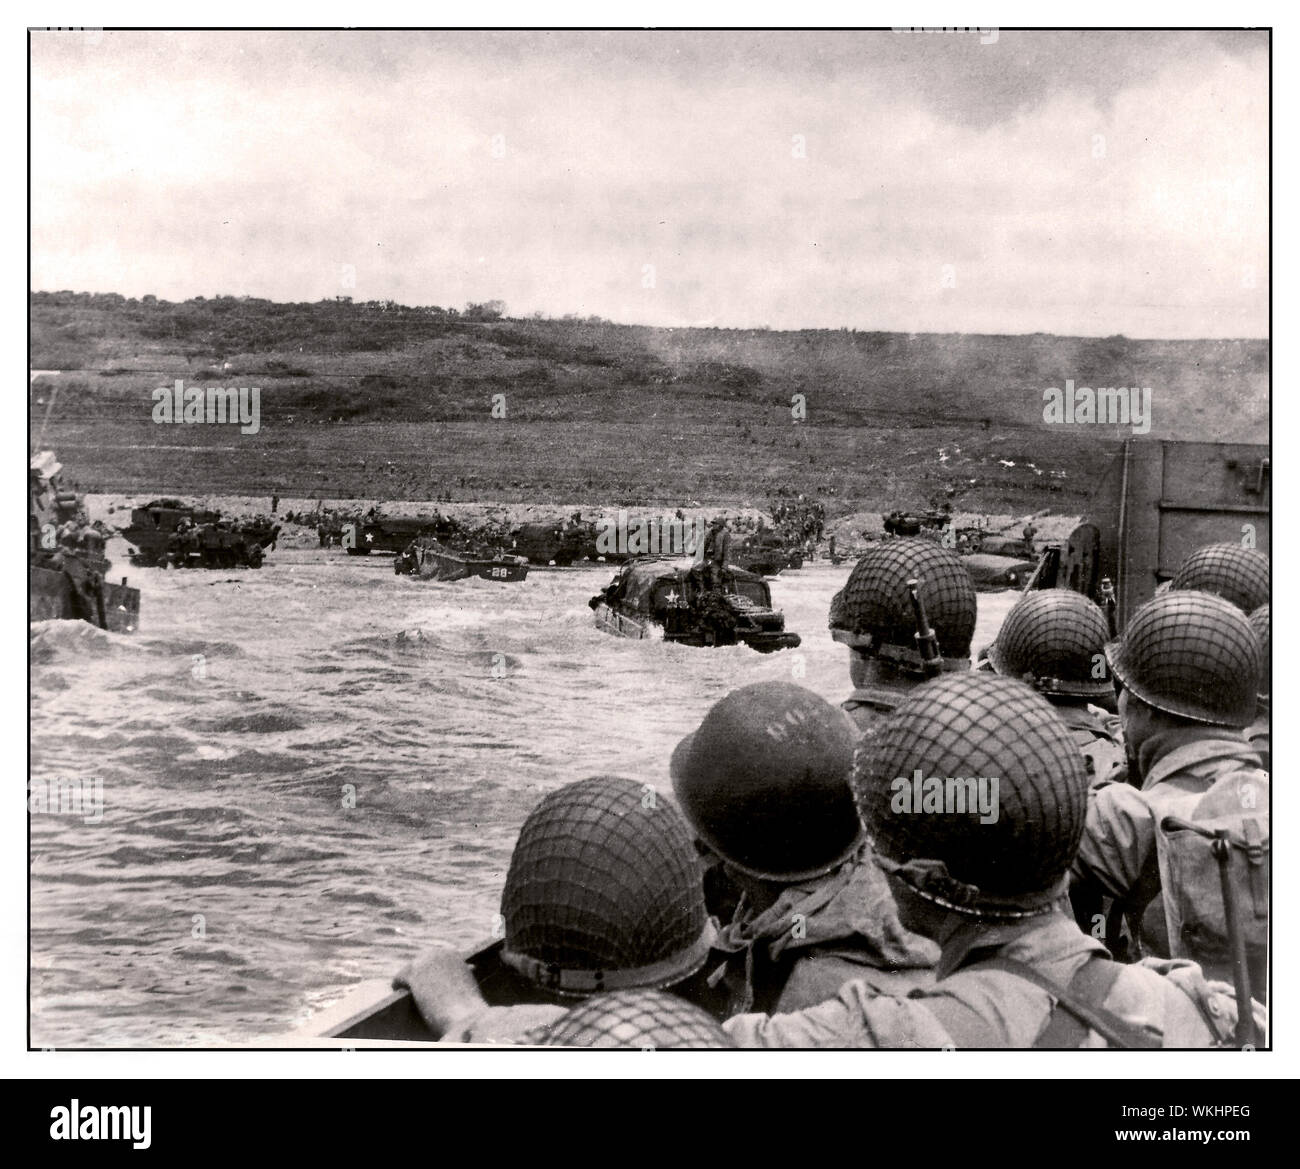 D-Day WW2 JUNE 6th 1944 American GI Soldiers group in a pitching landing craft ready to beach under fire by Nazi Wehrmacht gun emplacements at Normandy France during the Allied invasion, June 6, 1944. Along a 50-mile stretch of coastline in northern France, more than 160,000 Allied troops stormed Utah Beach and four other beaches that day to gain a foothold in continental Nazi Europe. By the end of the D-Day invasion, more than 9,000 of those Allied troops were either dead or wounded -- the majority of them Americans. World War II Second World War Normandy France Stock Photo